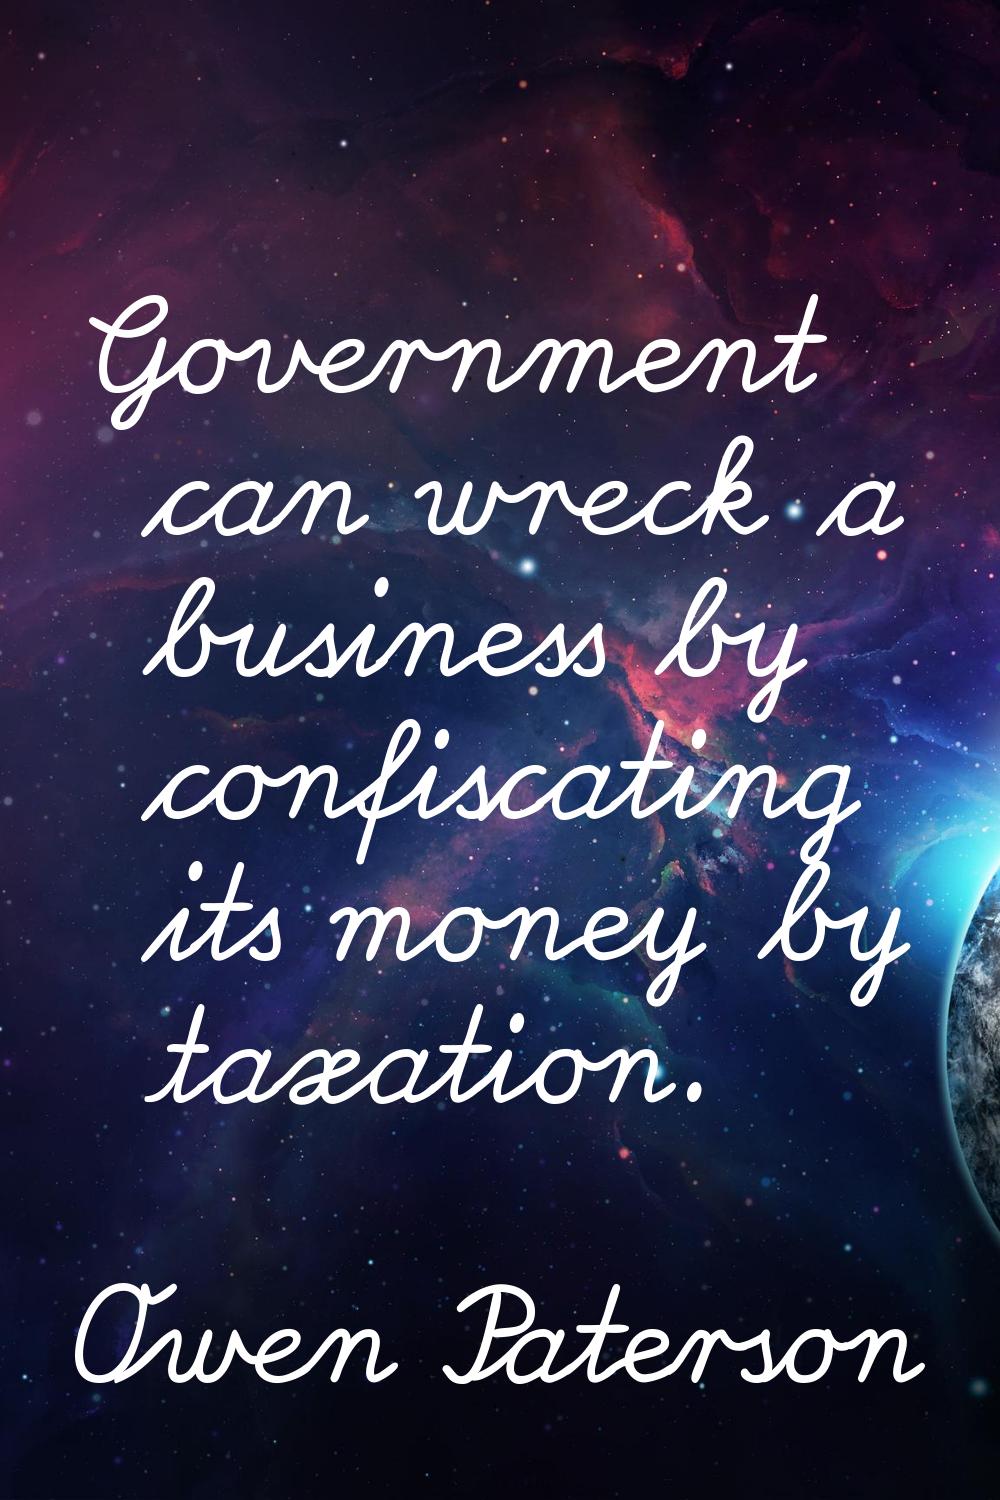 Government can wreck a business by confiscating its money by taxation.